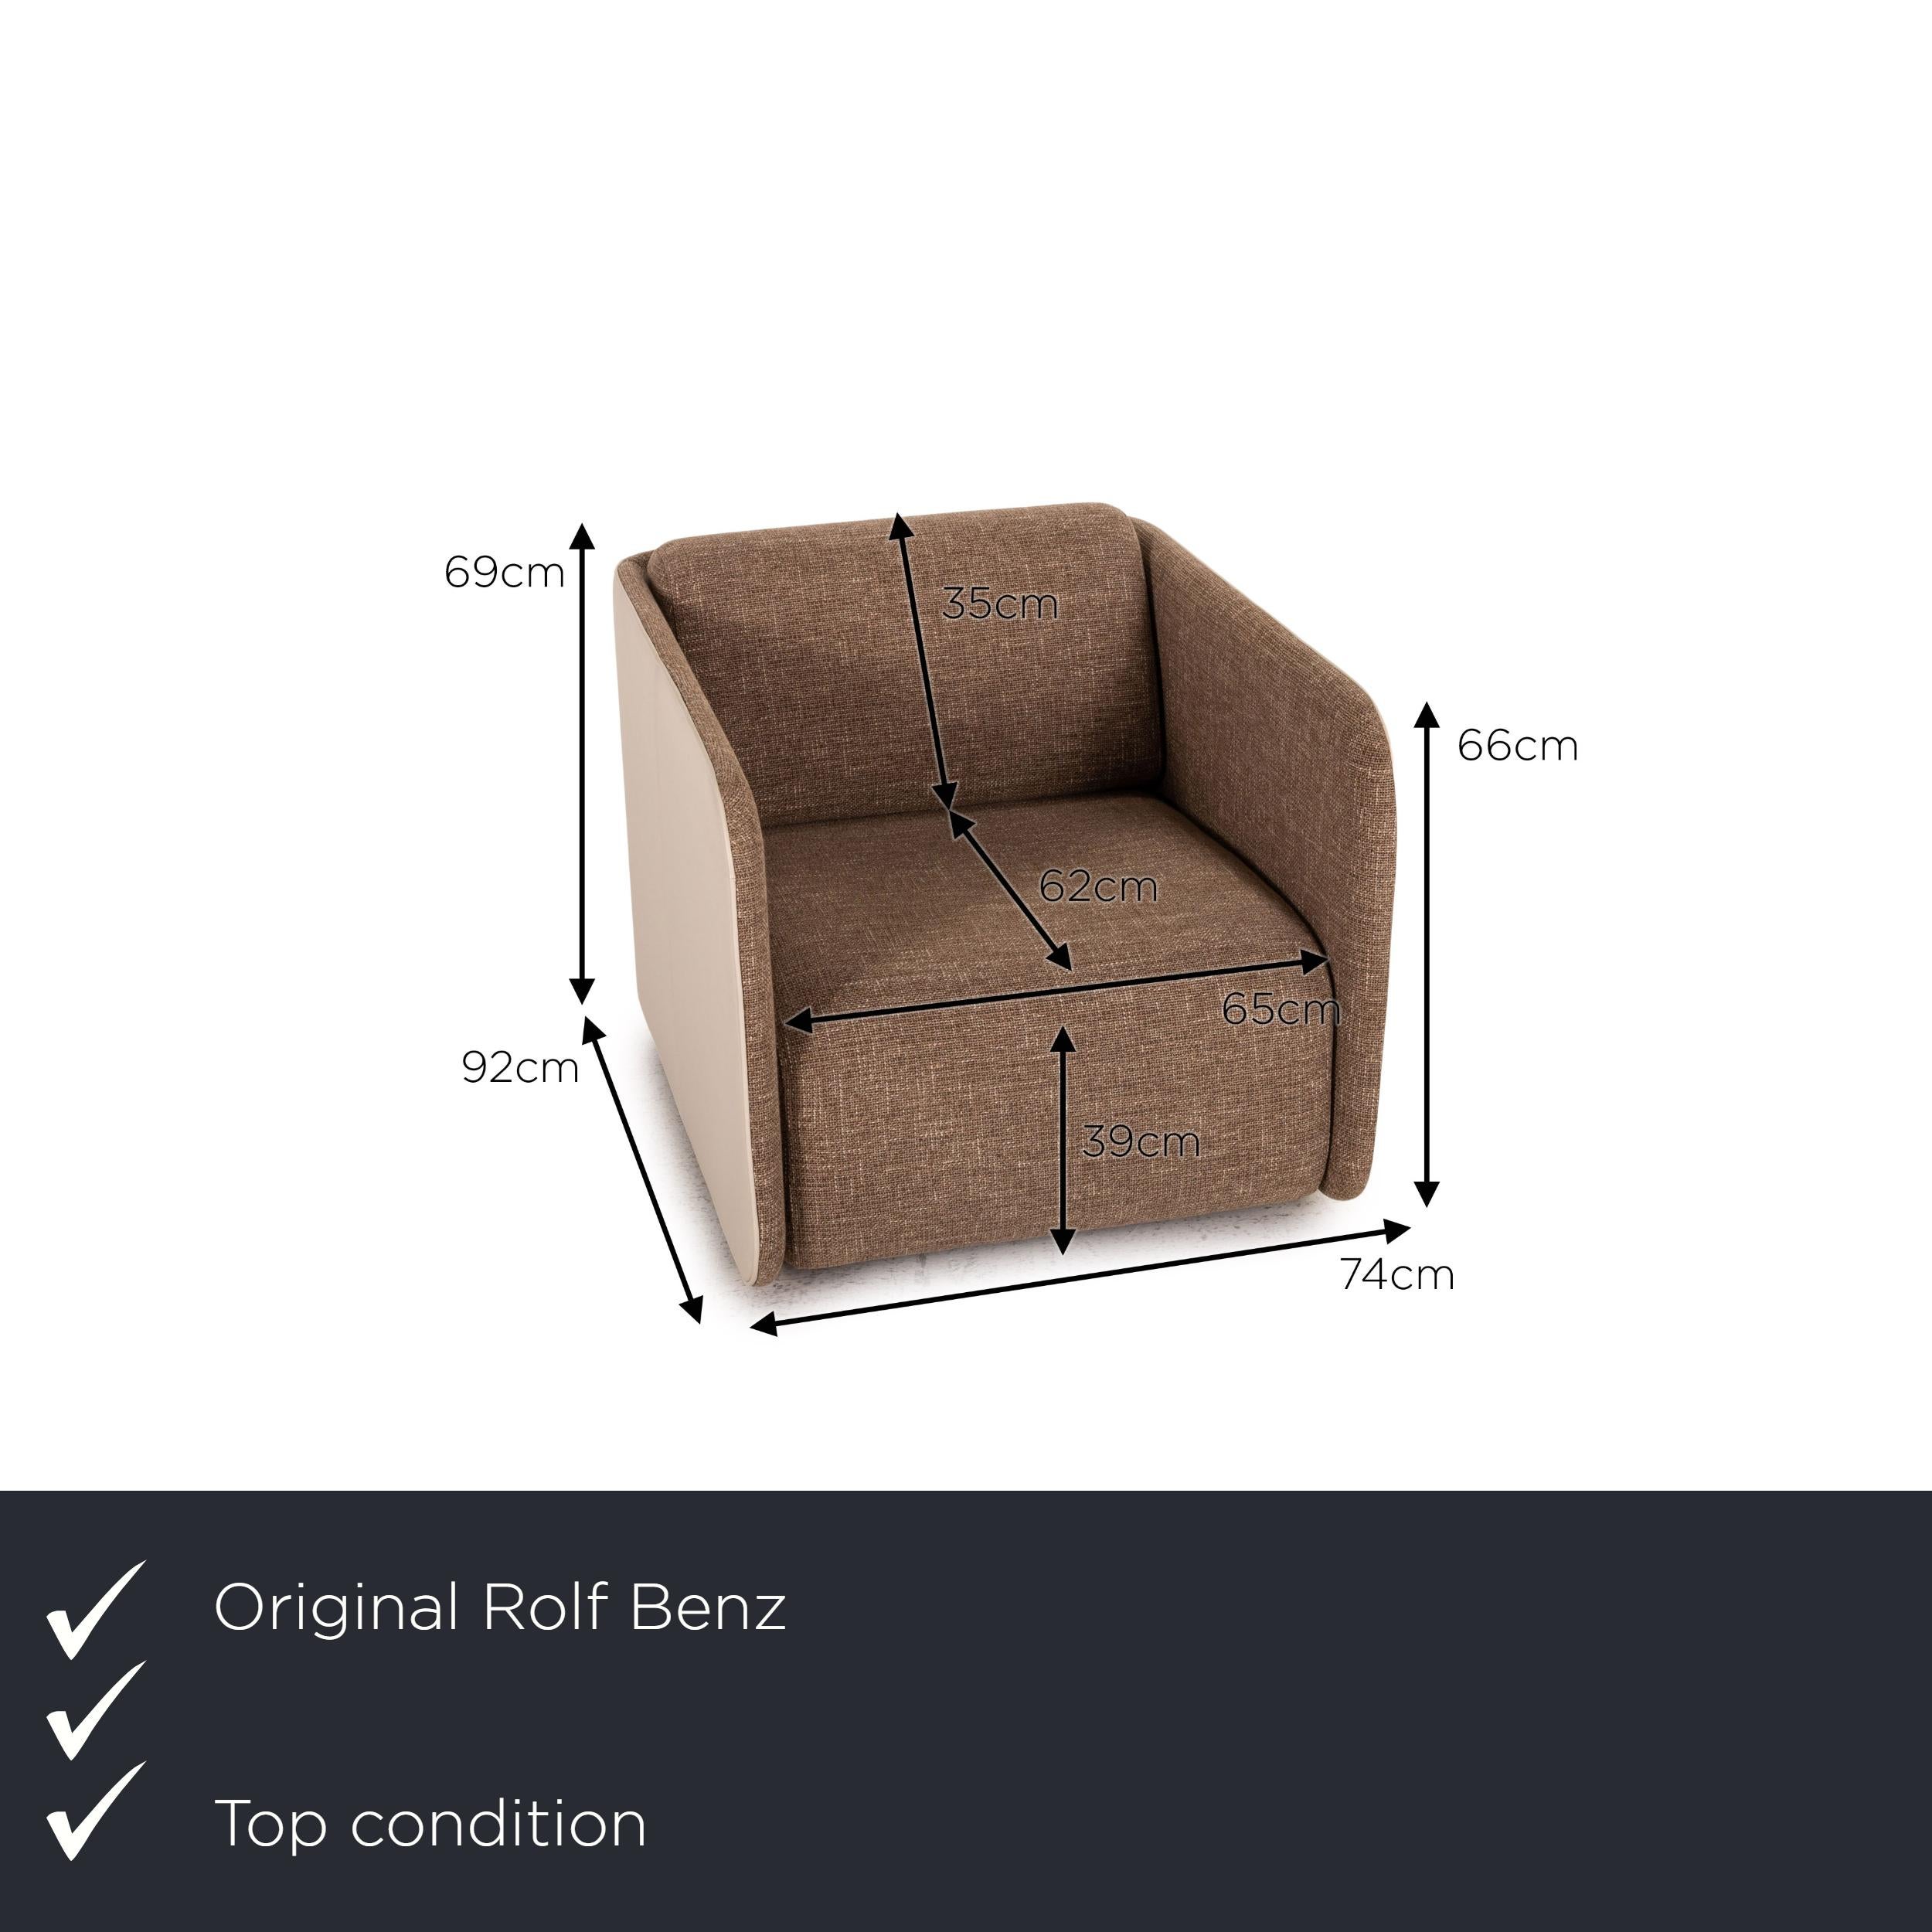 We present to you a Rolf Benz 6900 fabric leather armchair cream brown Function swivel armchair.
 

 Product measurements in centimeters:
 

Depth: 92
Width: 74
Height: 69
Seat height: 39
Rest height: 66
Seat depth: 62
Seat width: